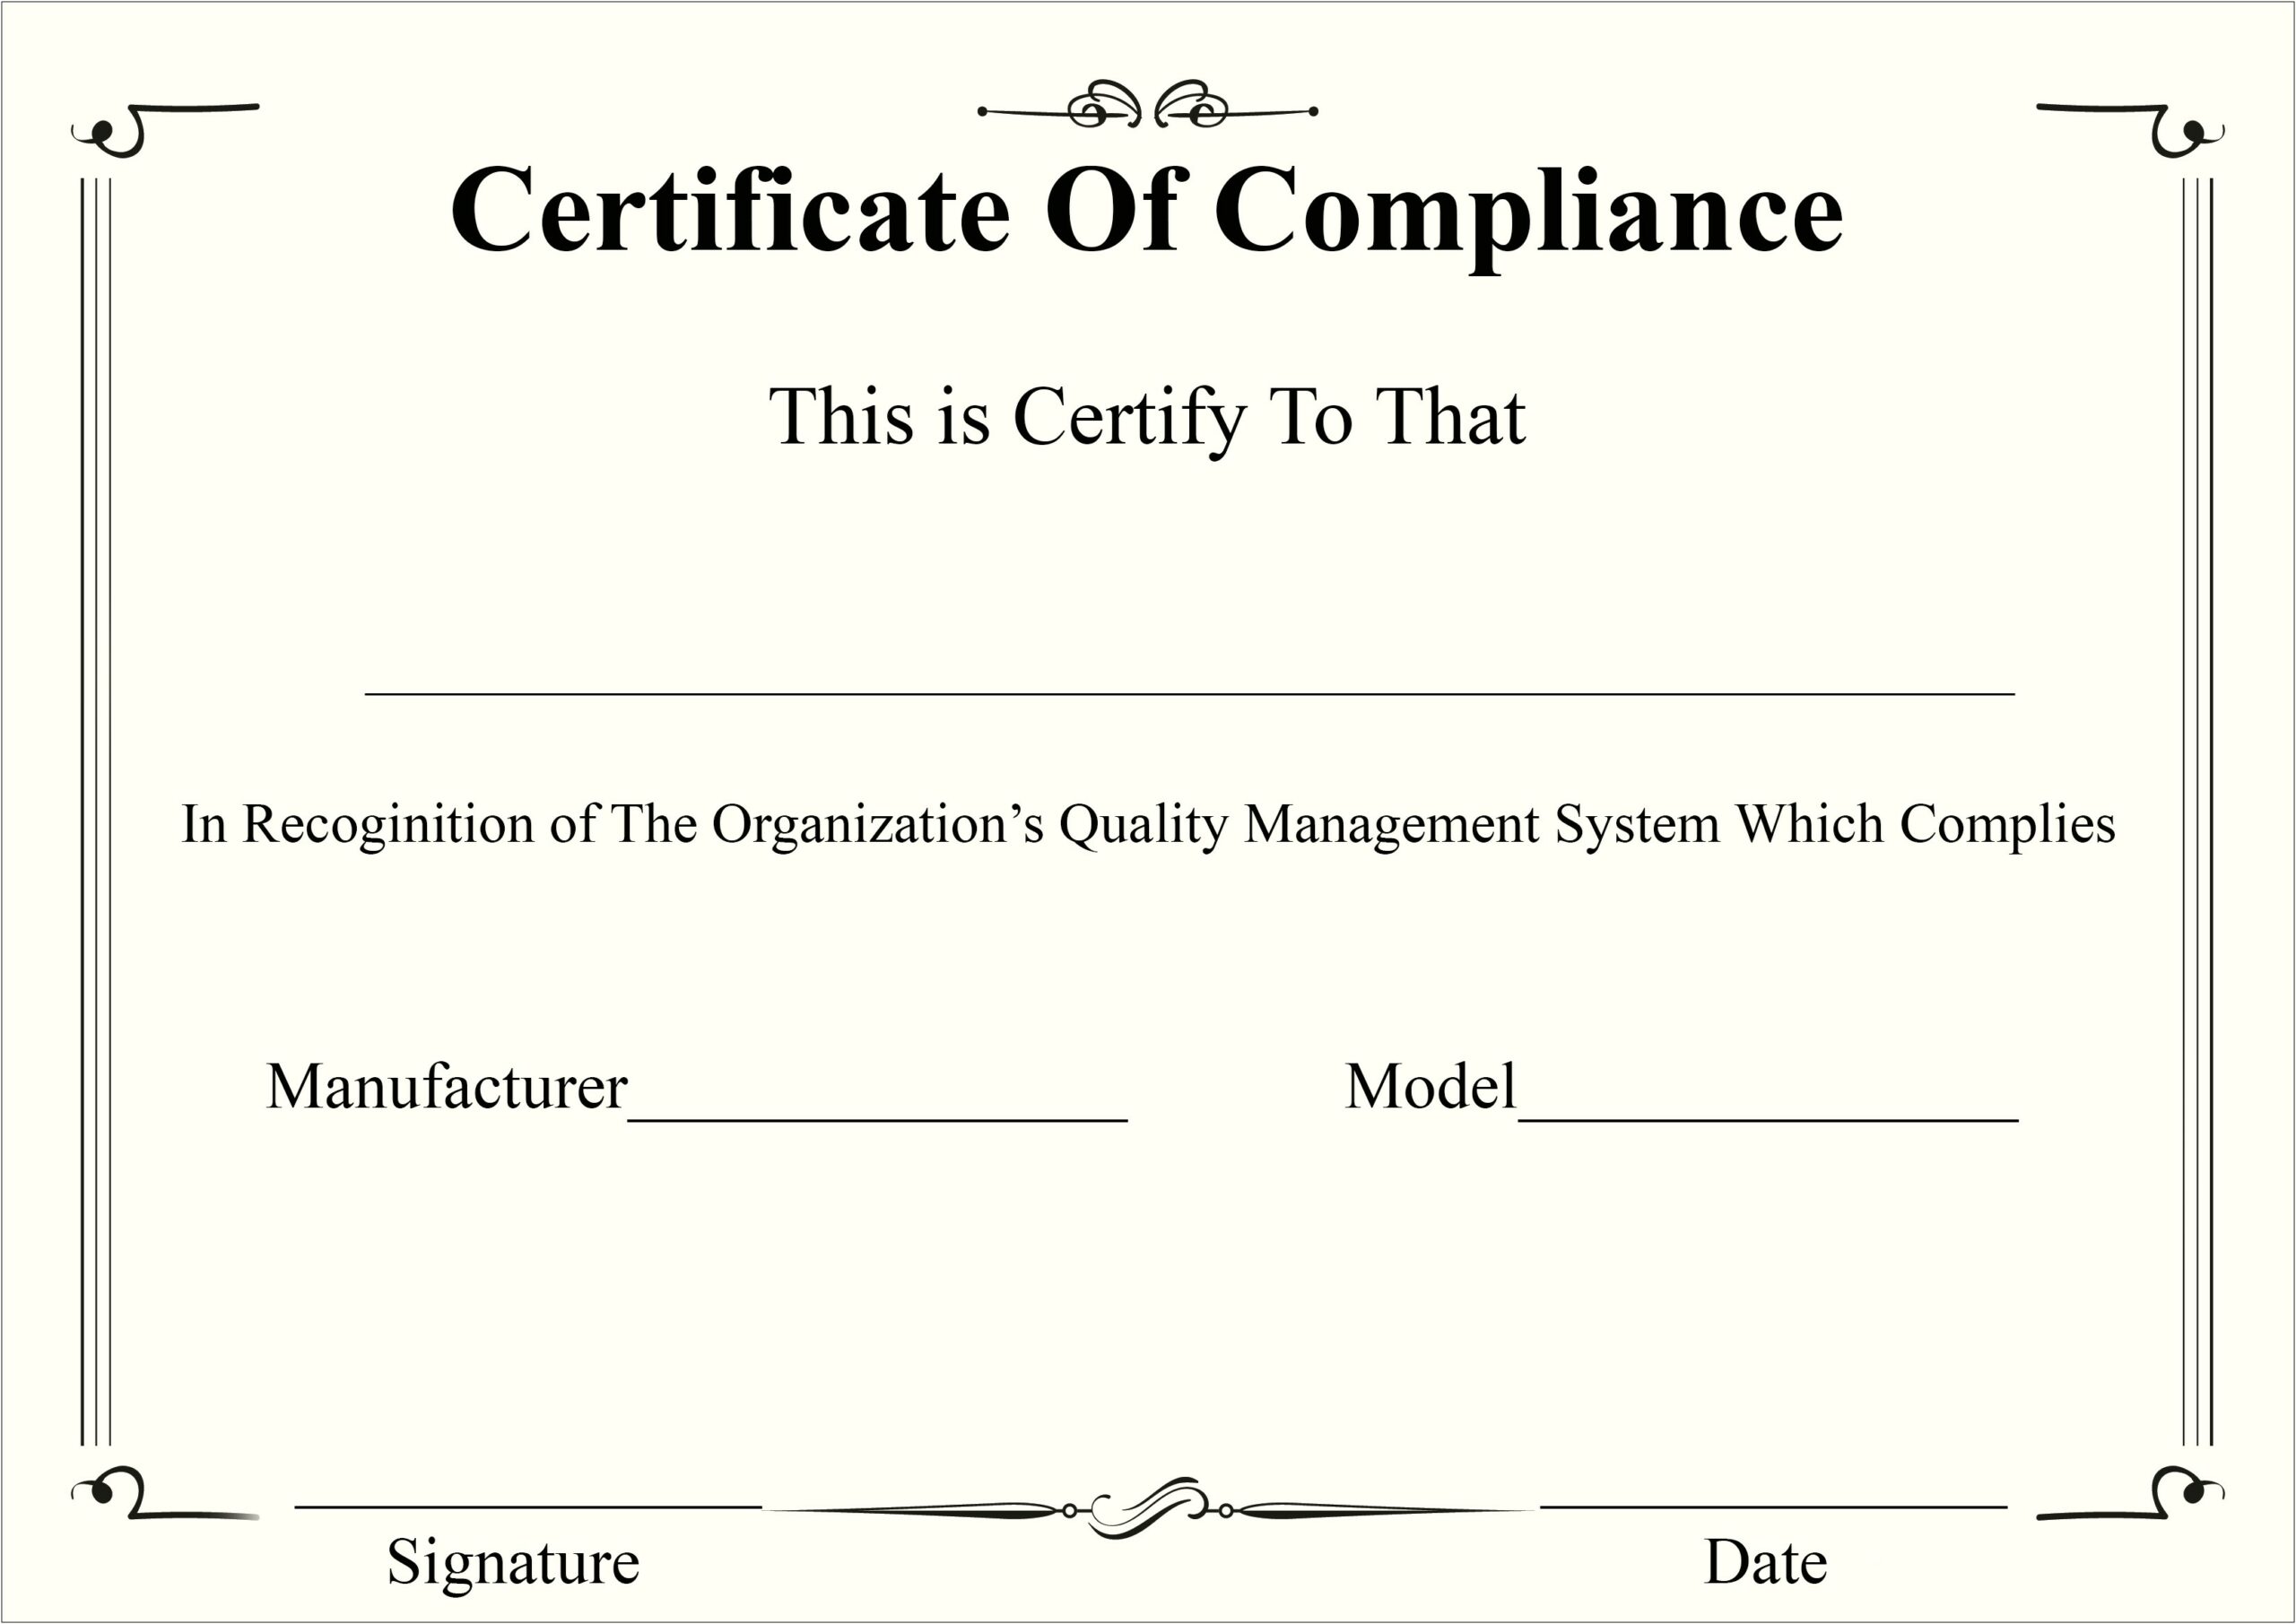 Certificate Of Compliance Template Microsoft Word